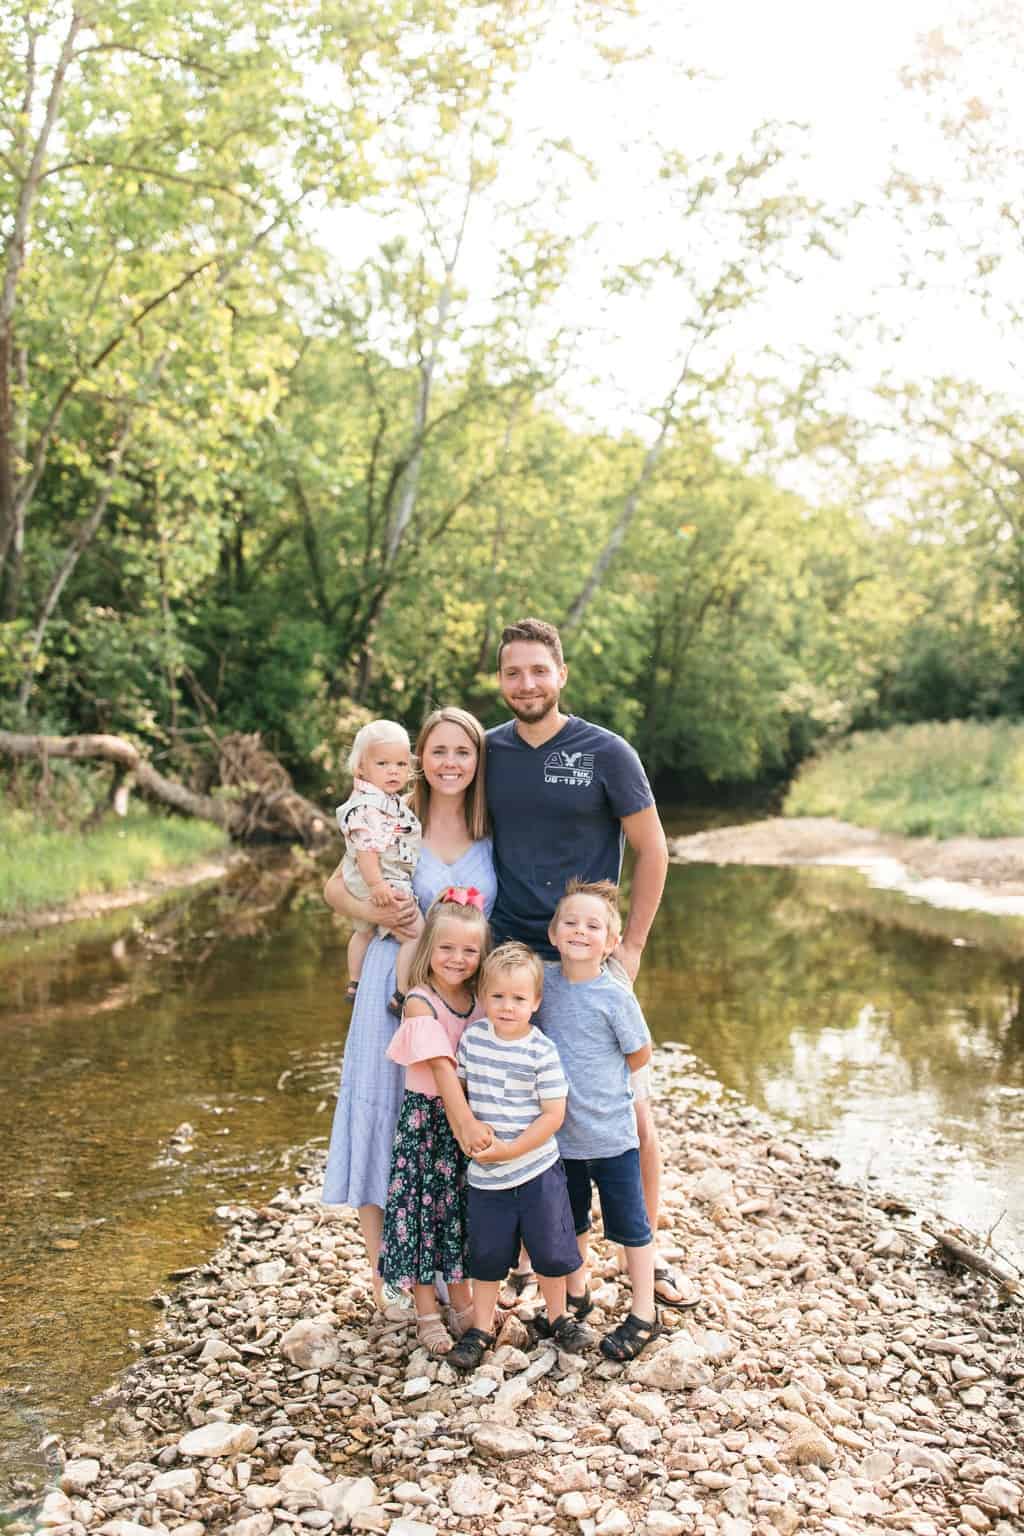 Family picture outside next to creek.